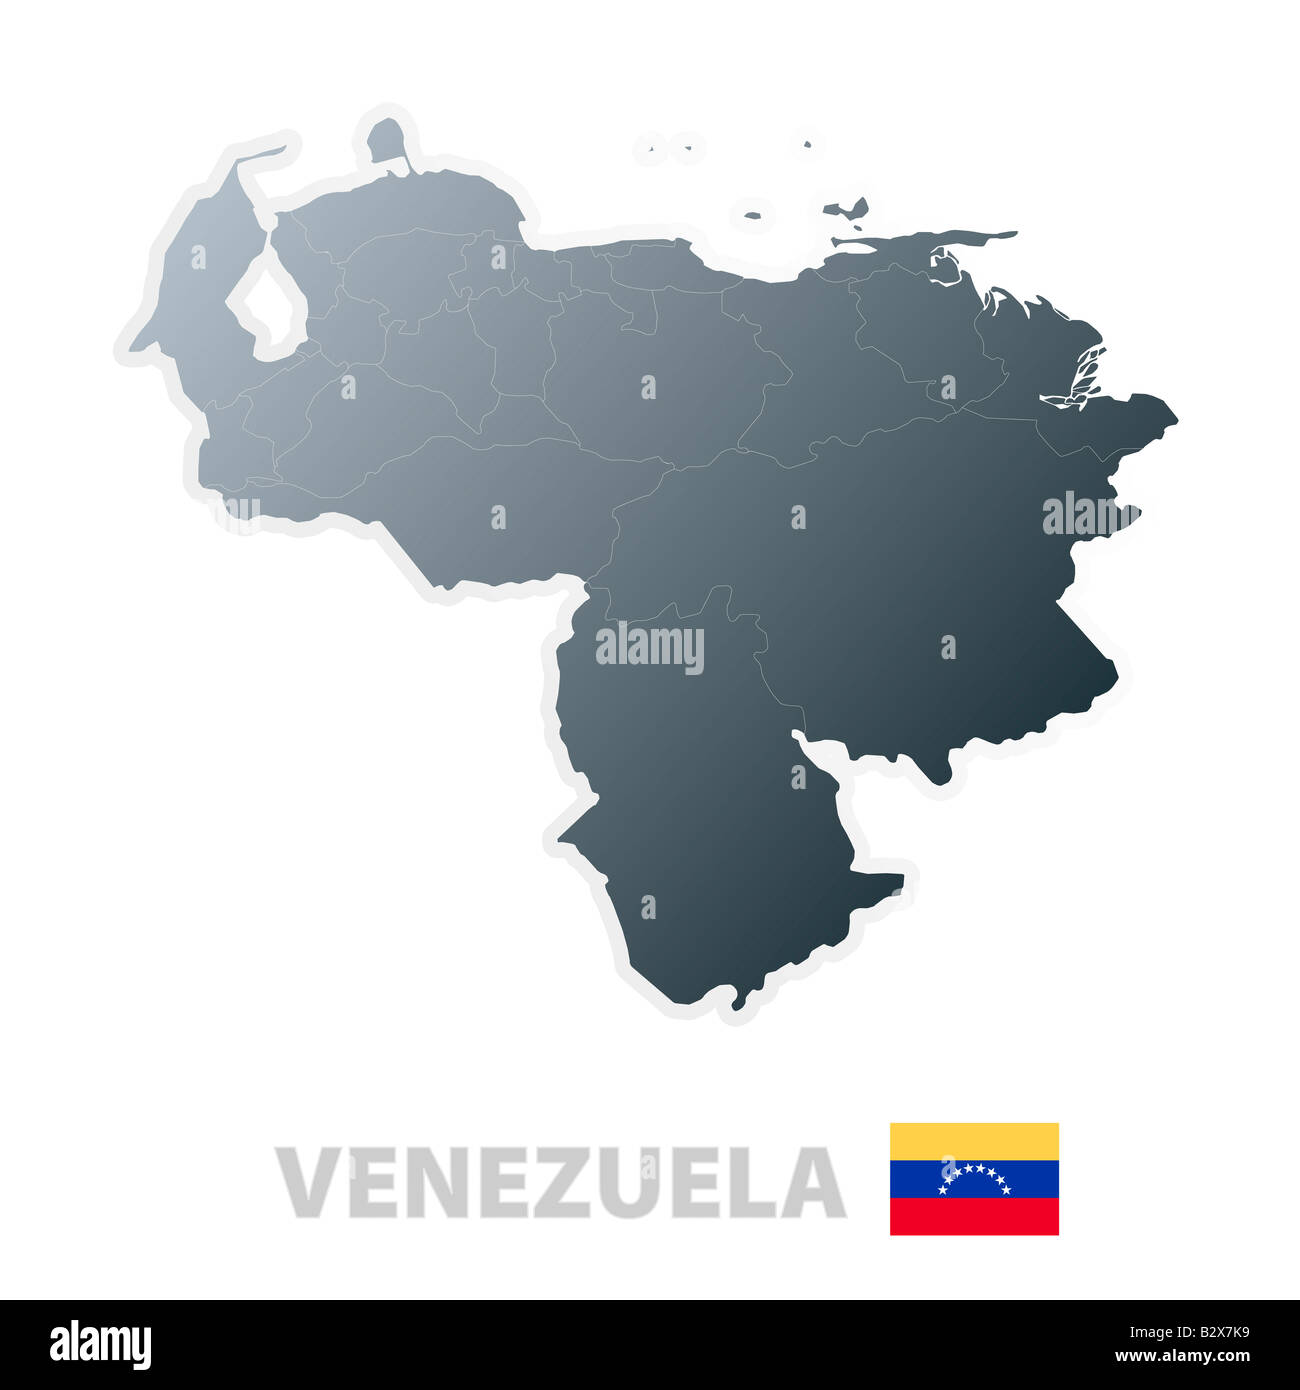 Vector illustration of the map with regions or stes and the official flag of Venezuela Stock Photo